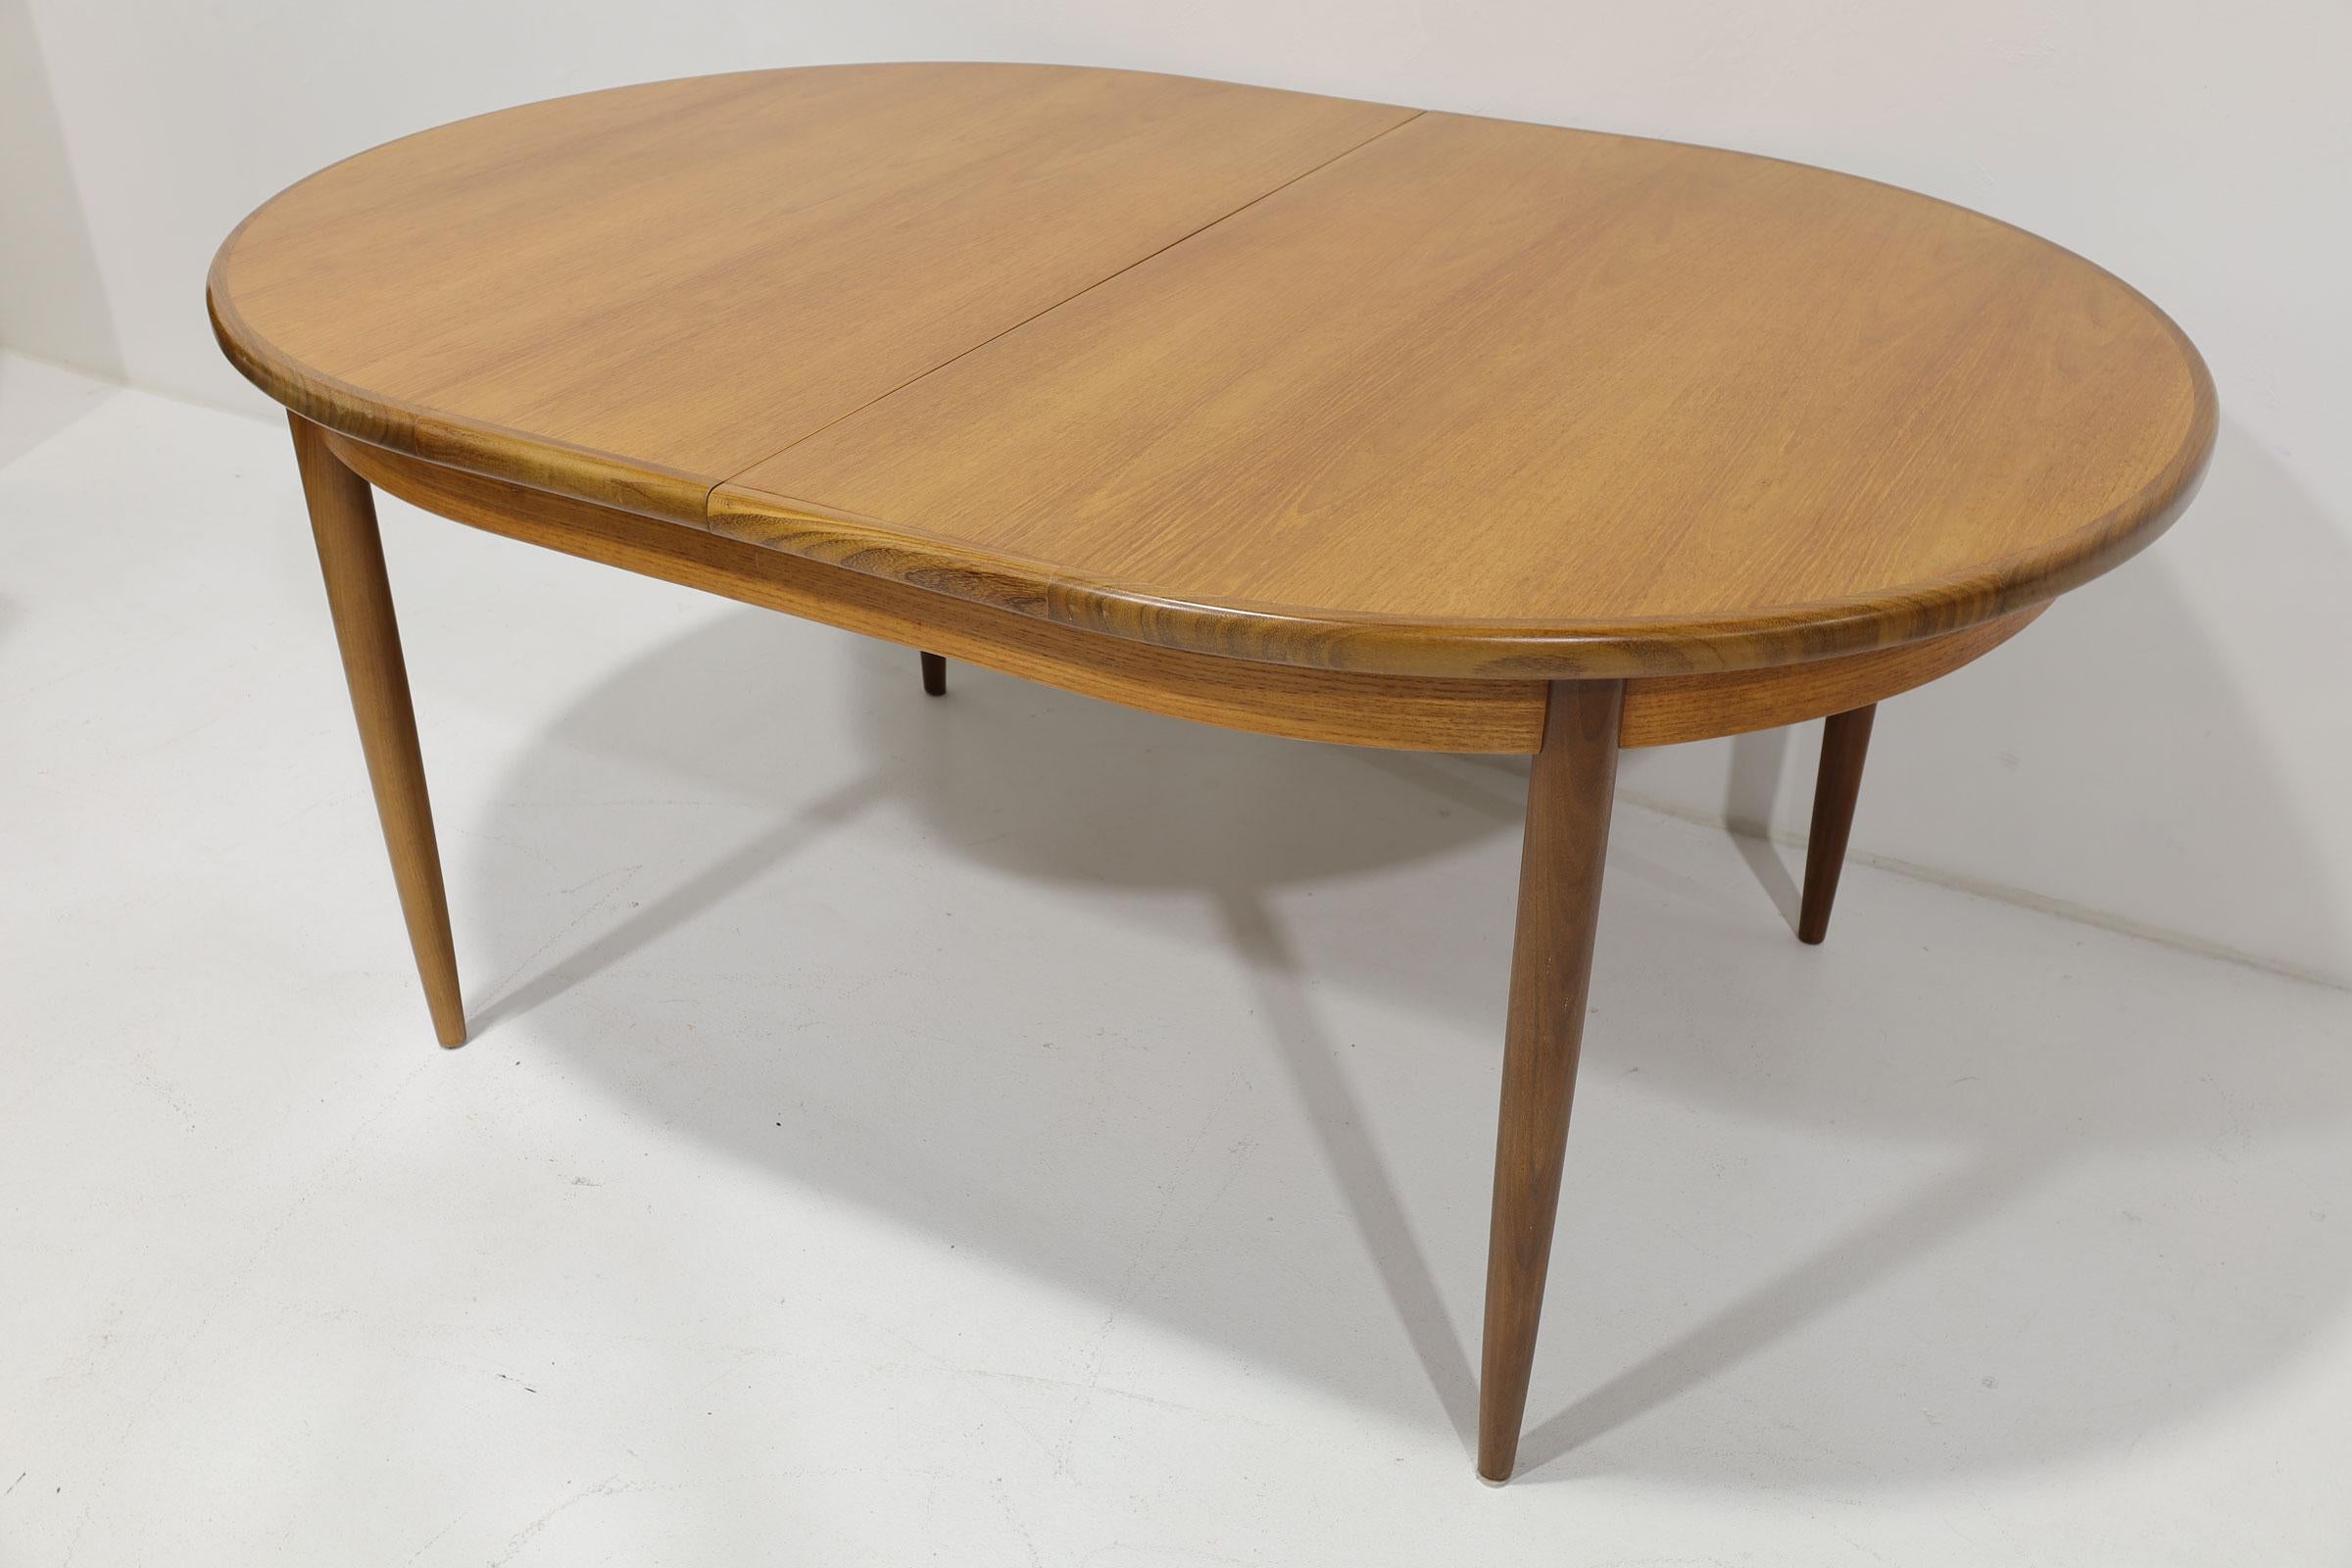 A good Mid-Century Modern G Plan teak extendable dining table from the 